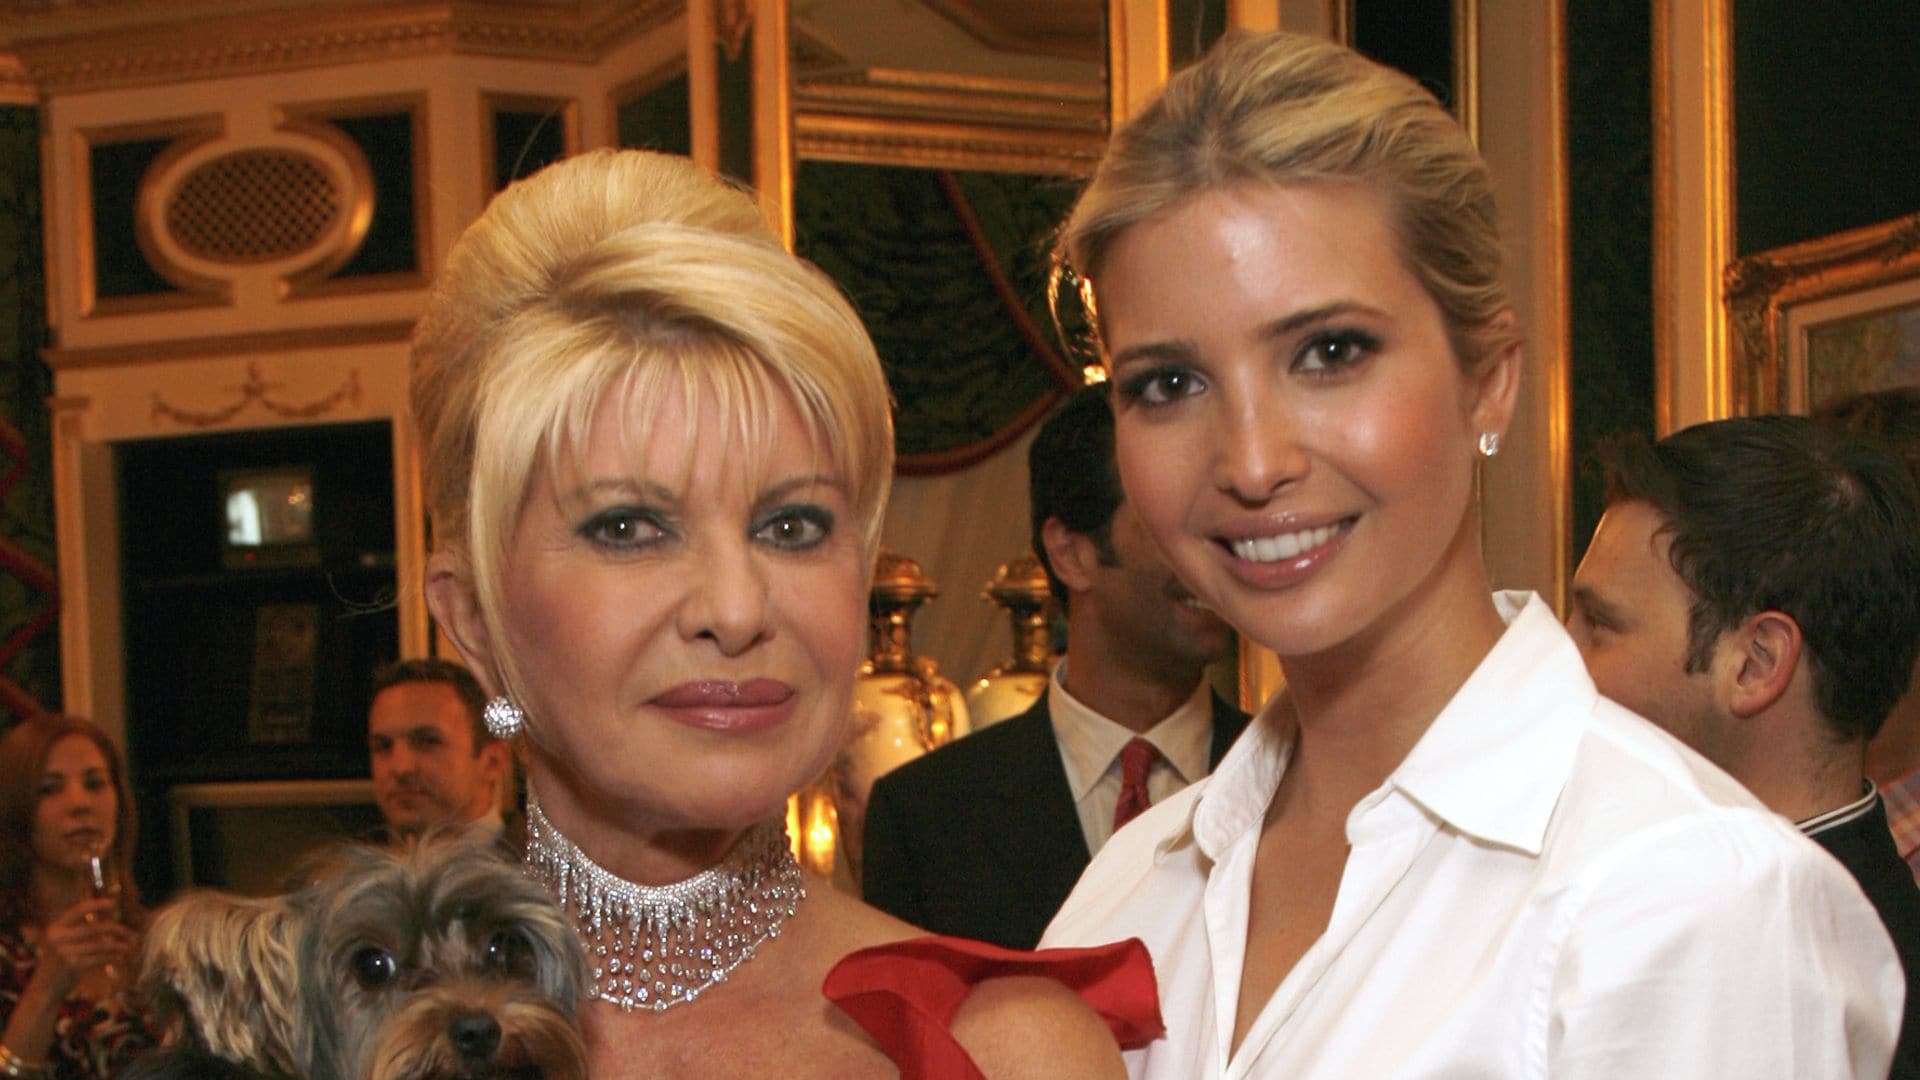 Ivanka Trump on her late mother Ivana; 'I learned from her how to enjoy life'